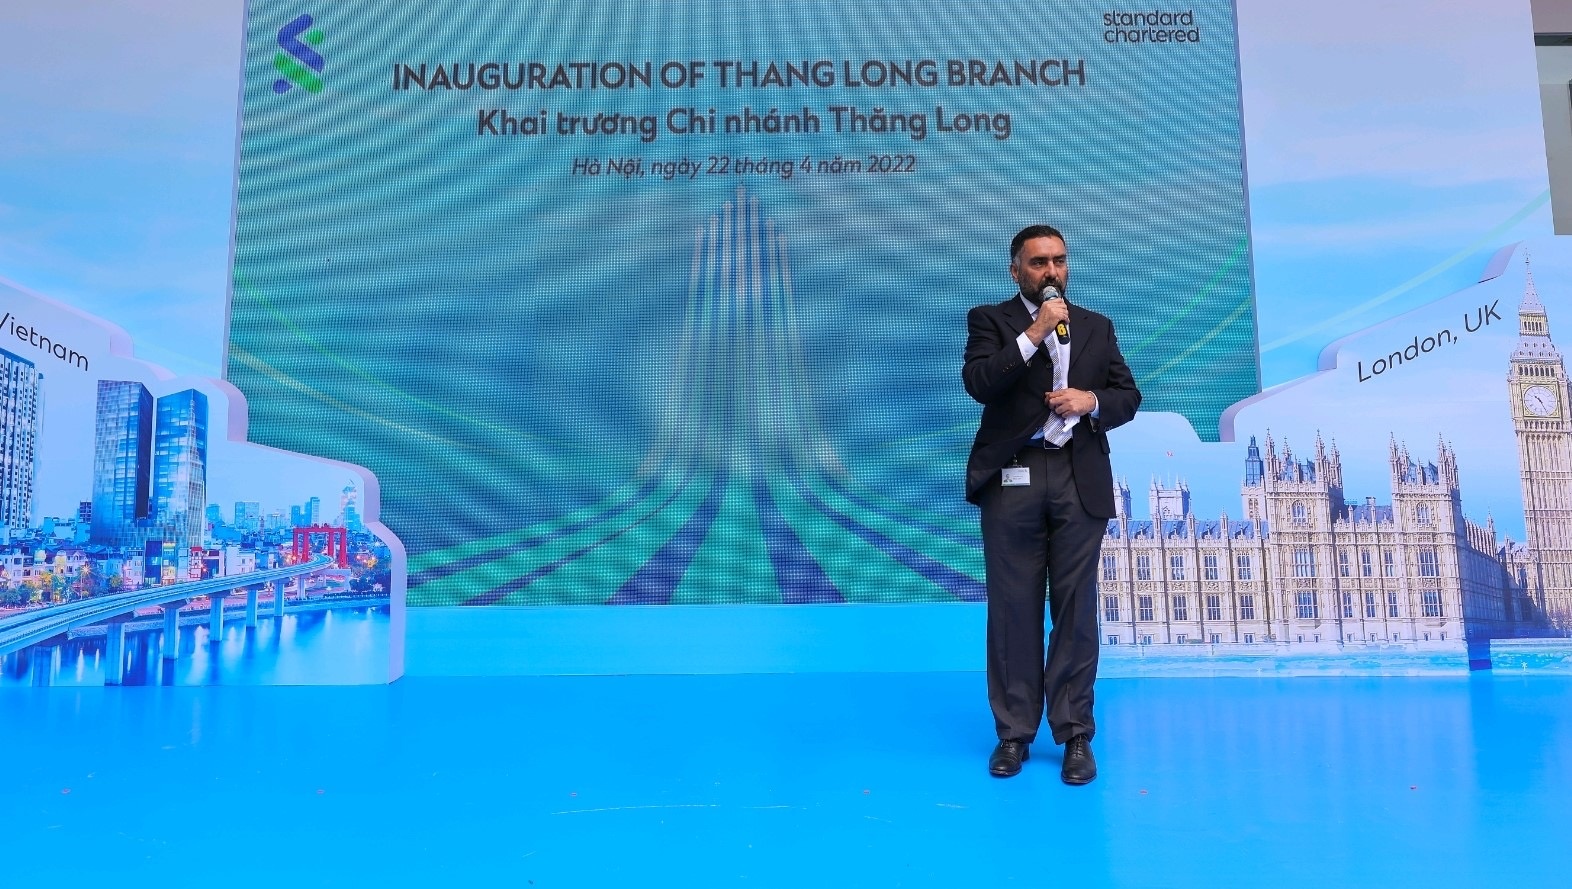 Standard Chartered Vietnam launches flagship Thang Long branch in in Hanoi